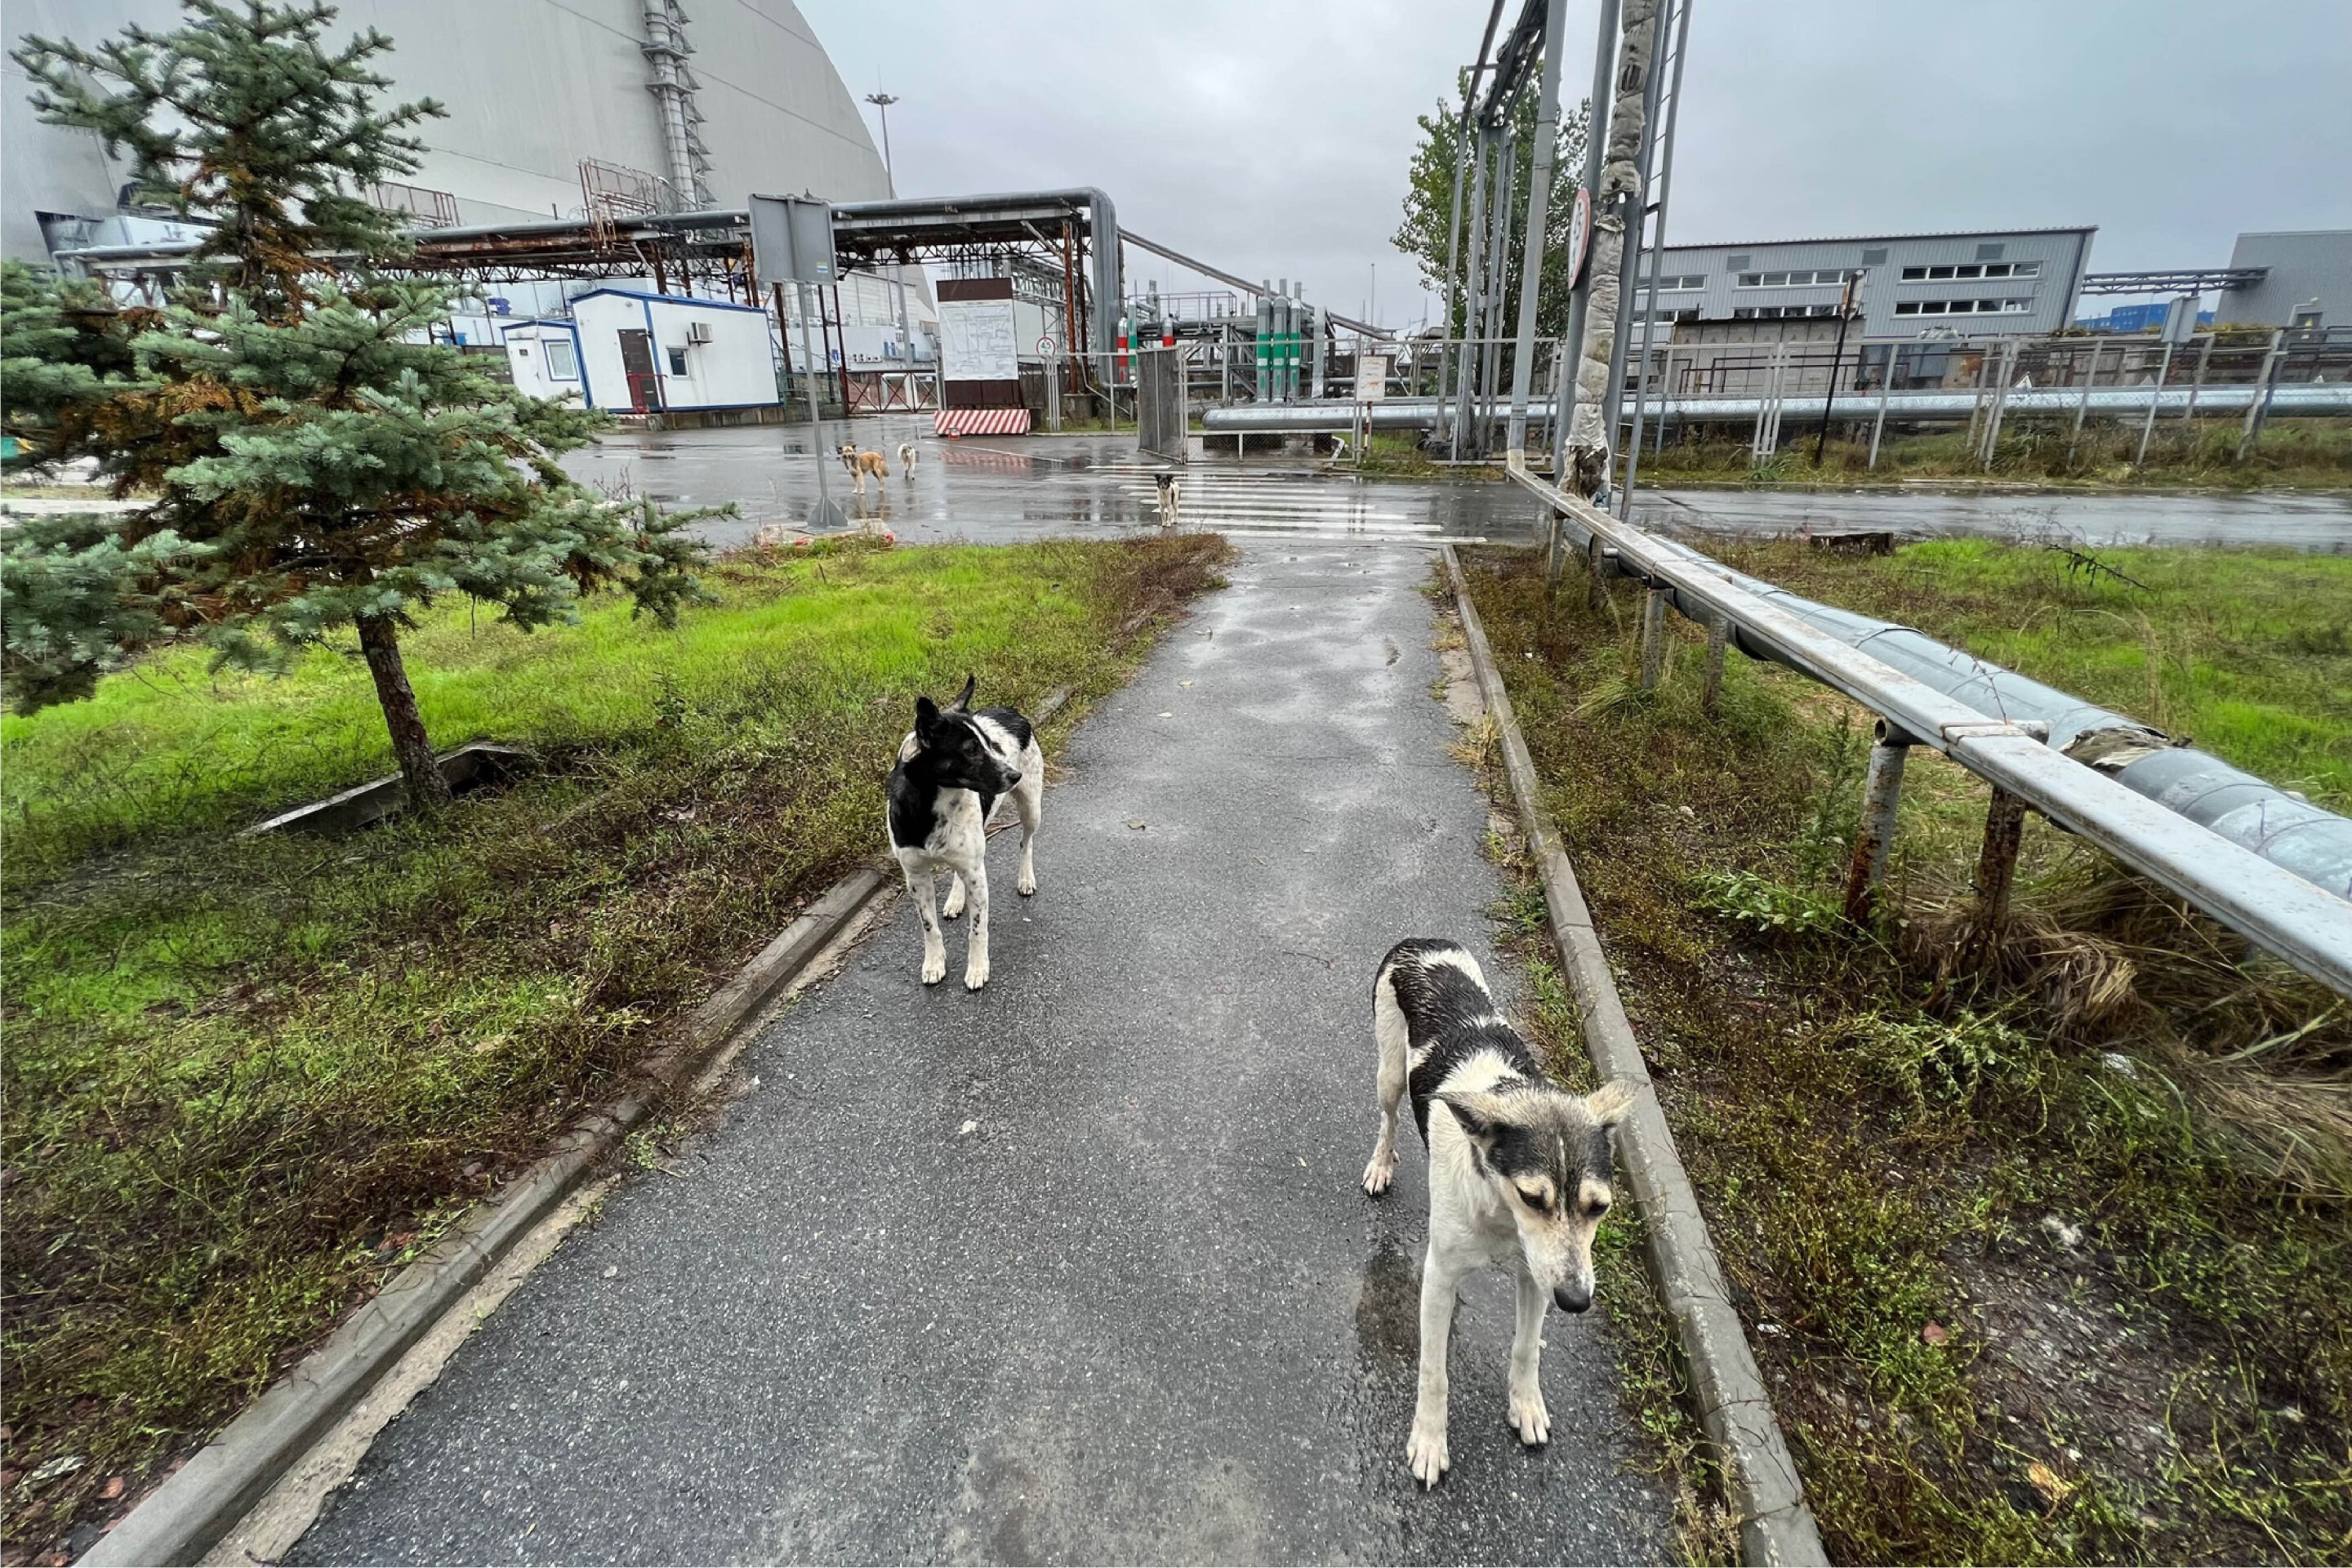 Can the dogs of Chernobyl teach us new tricks on survival?